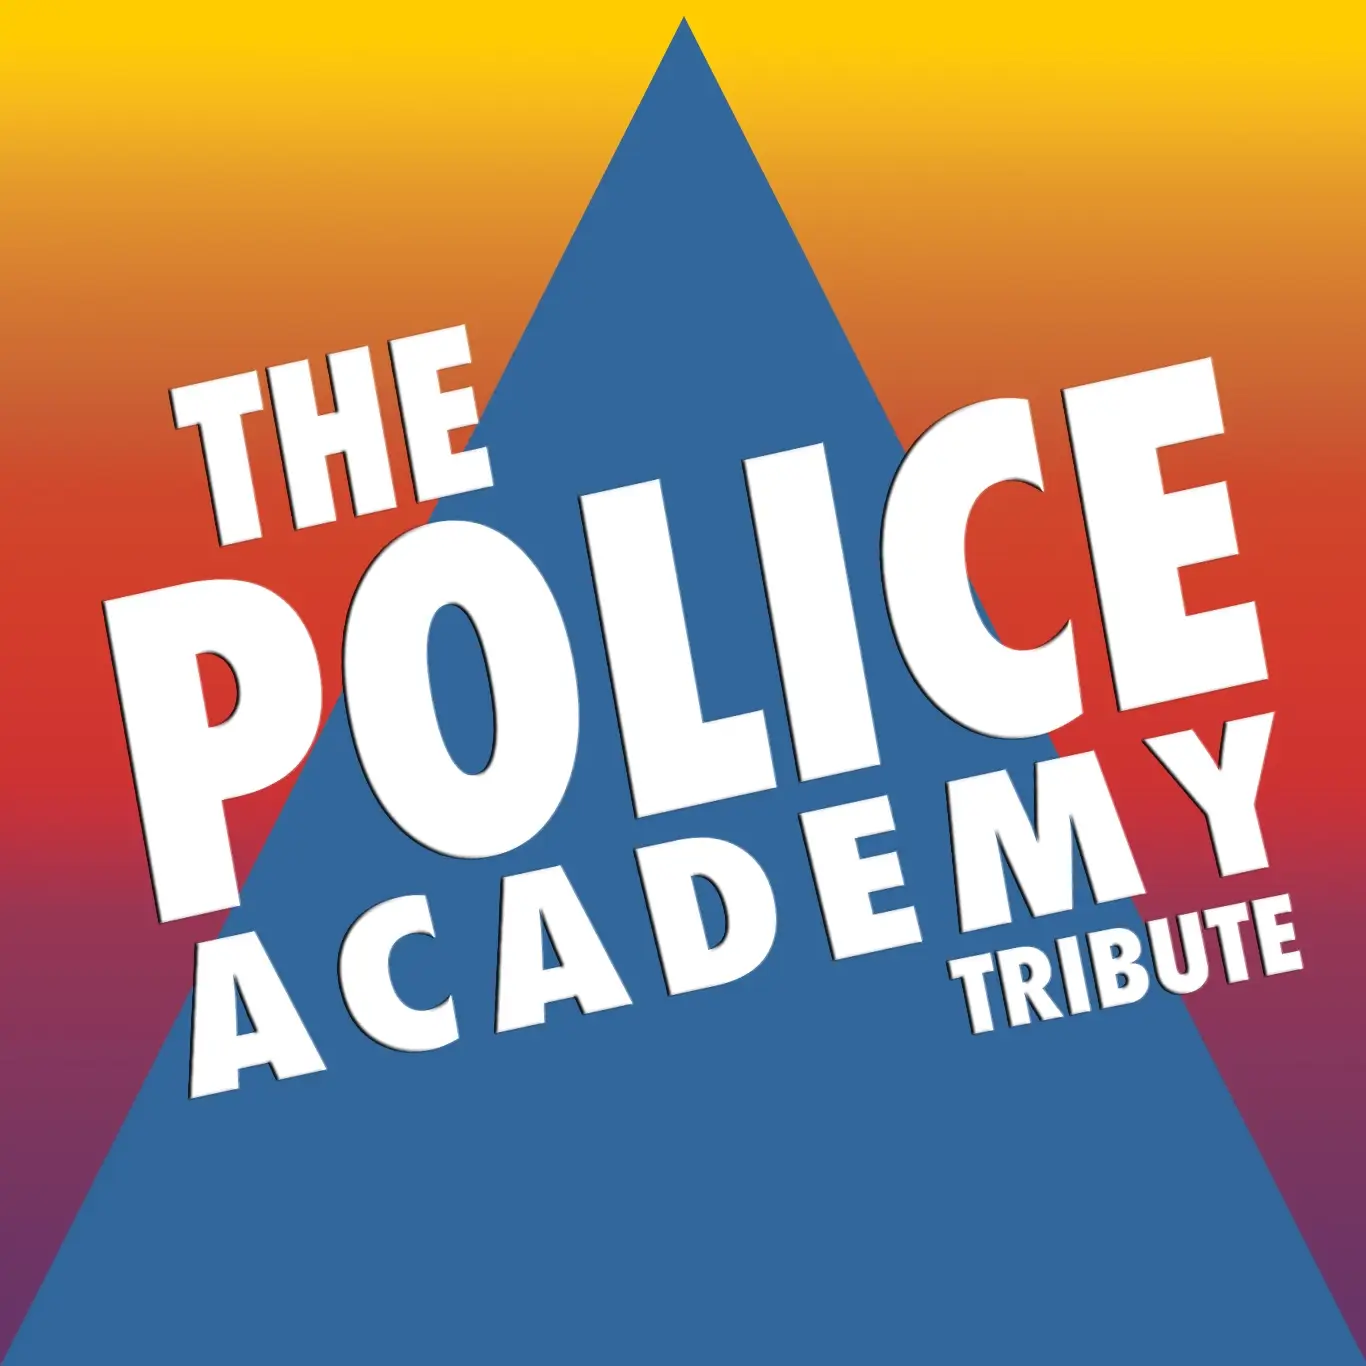 The Police Academy: America's Greatest Tribute to The Police!